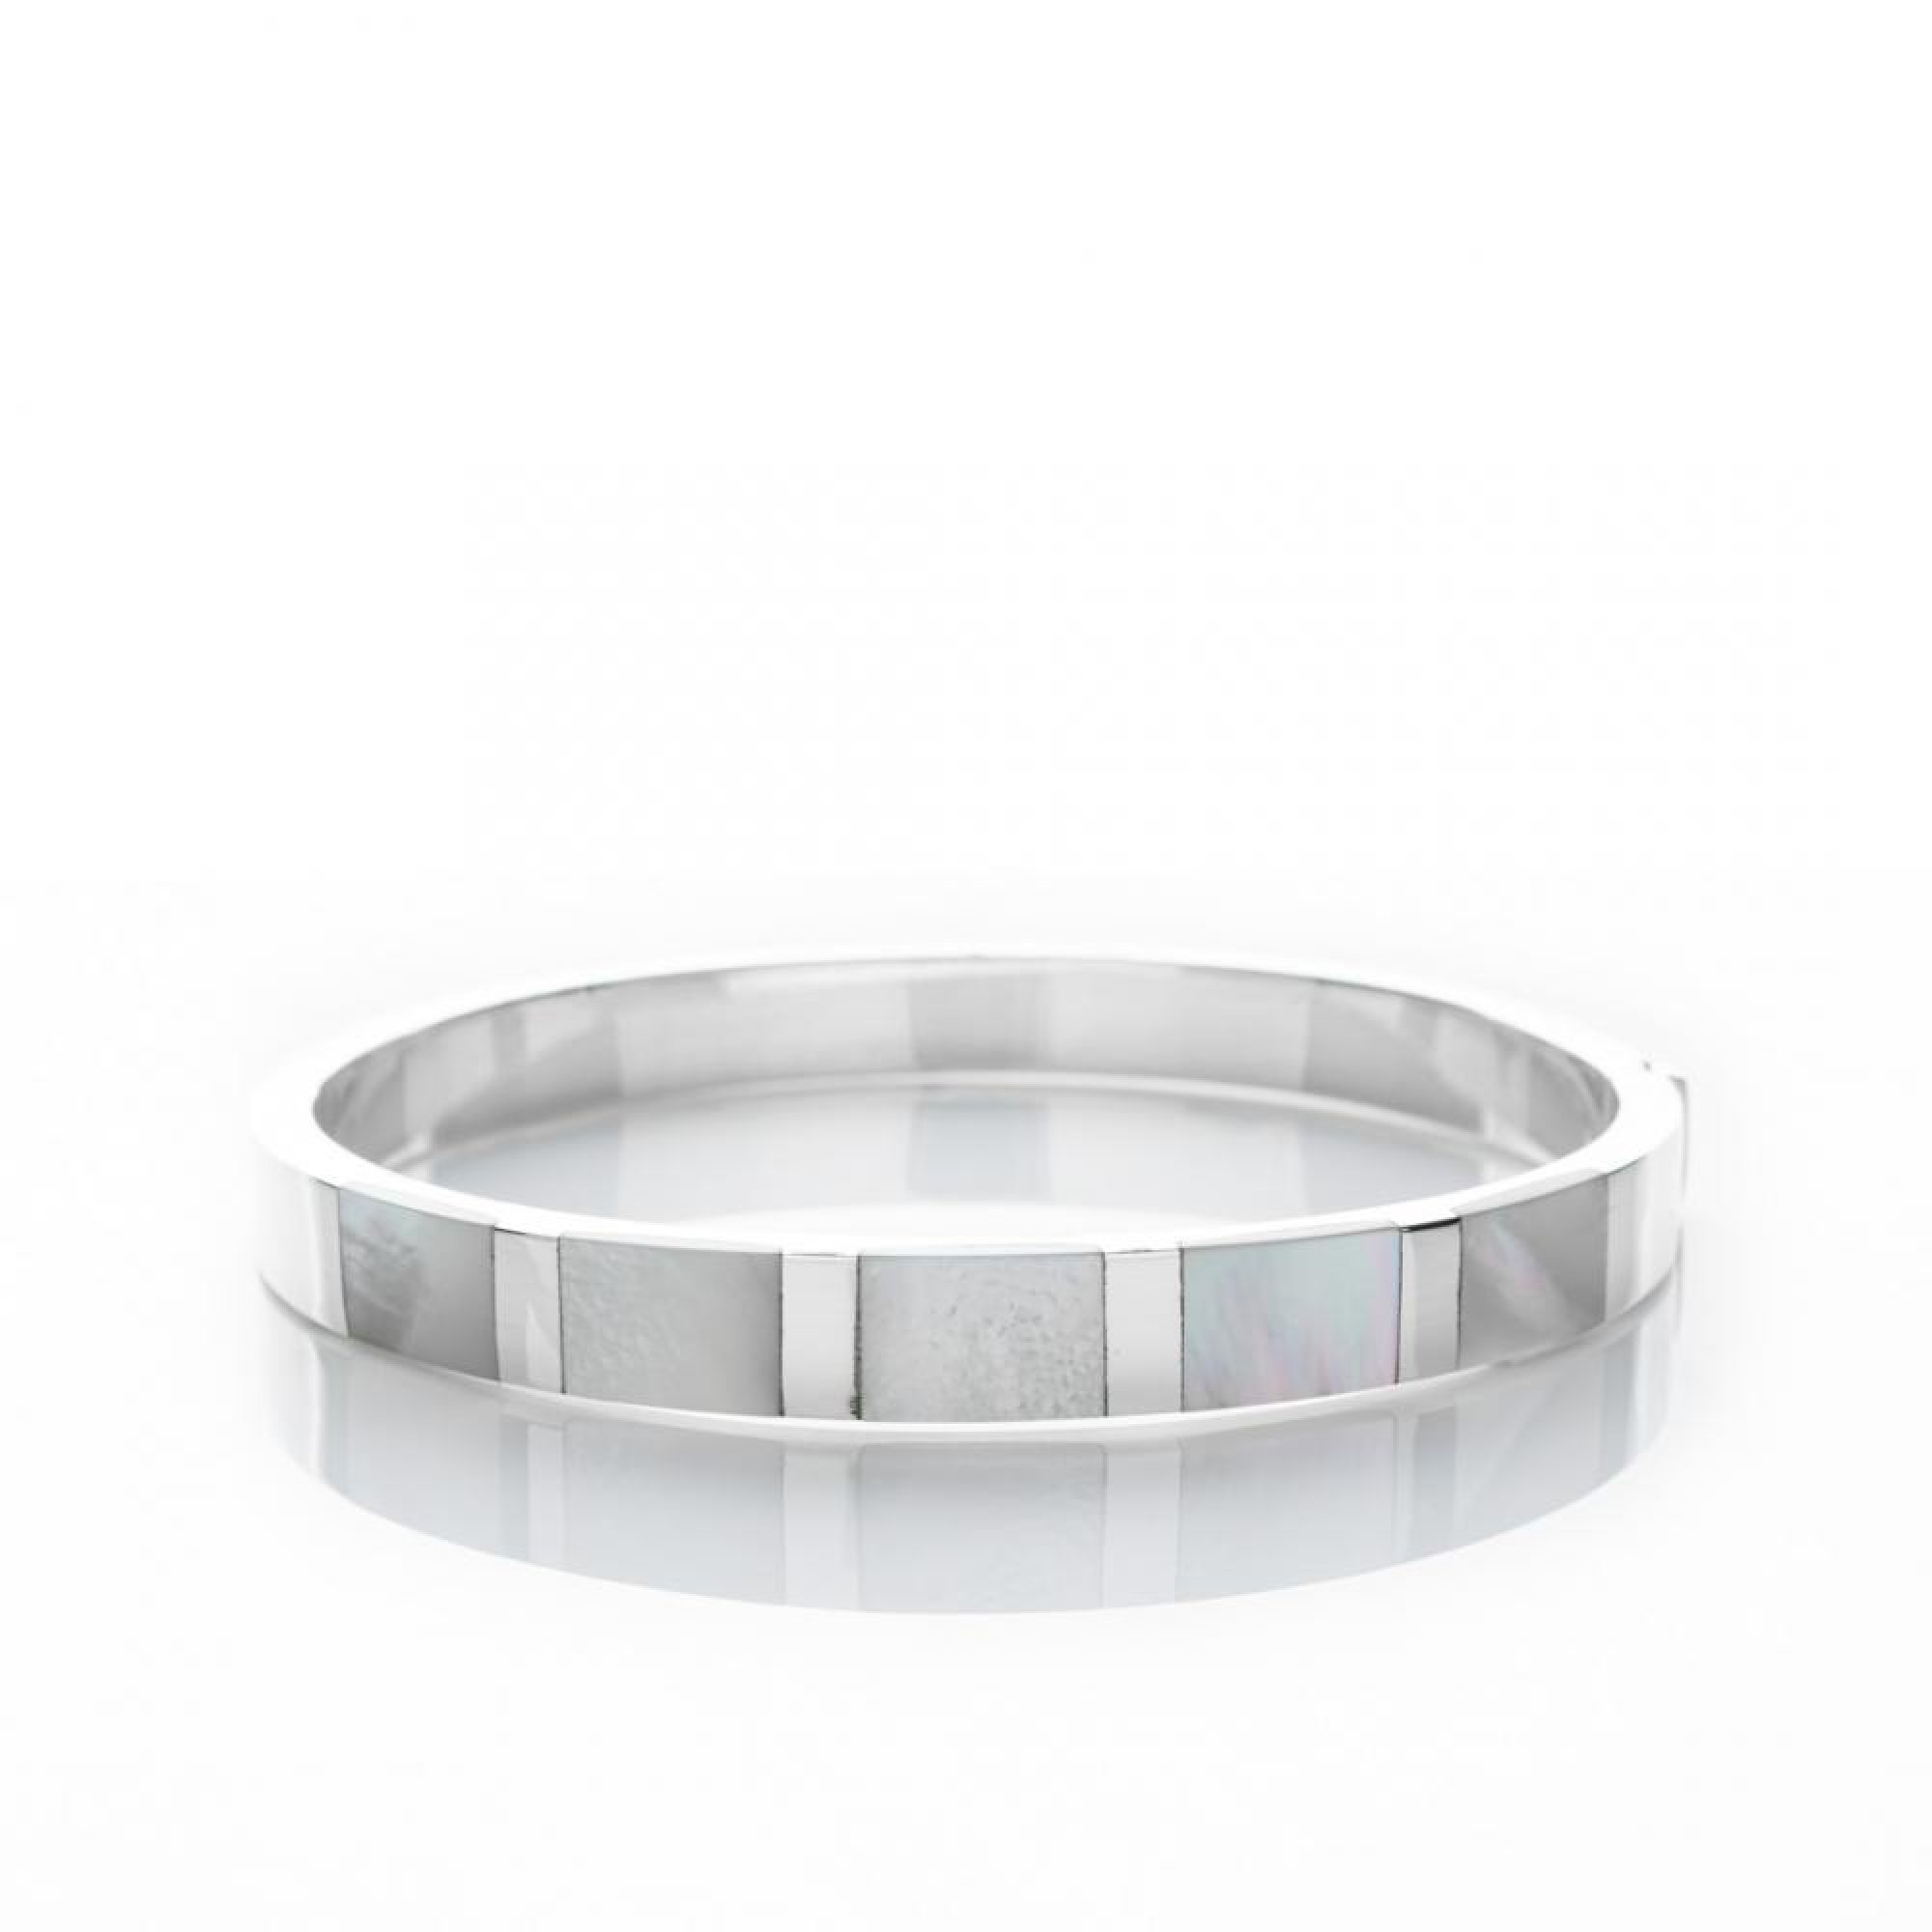 Bangle bracelet with mother of pearl